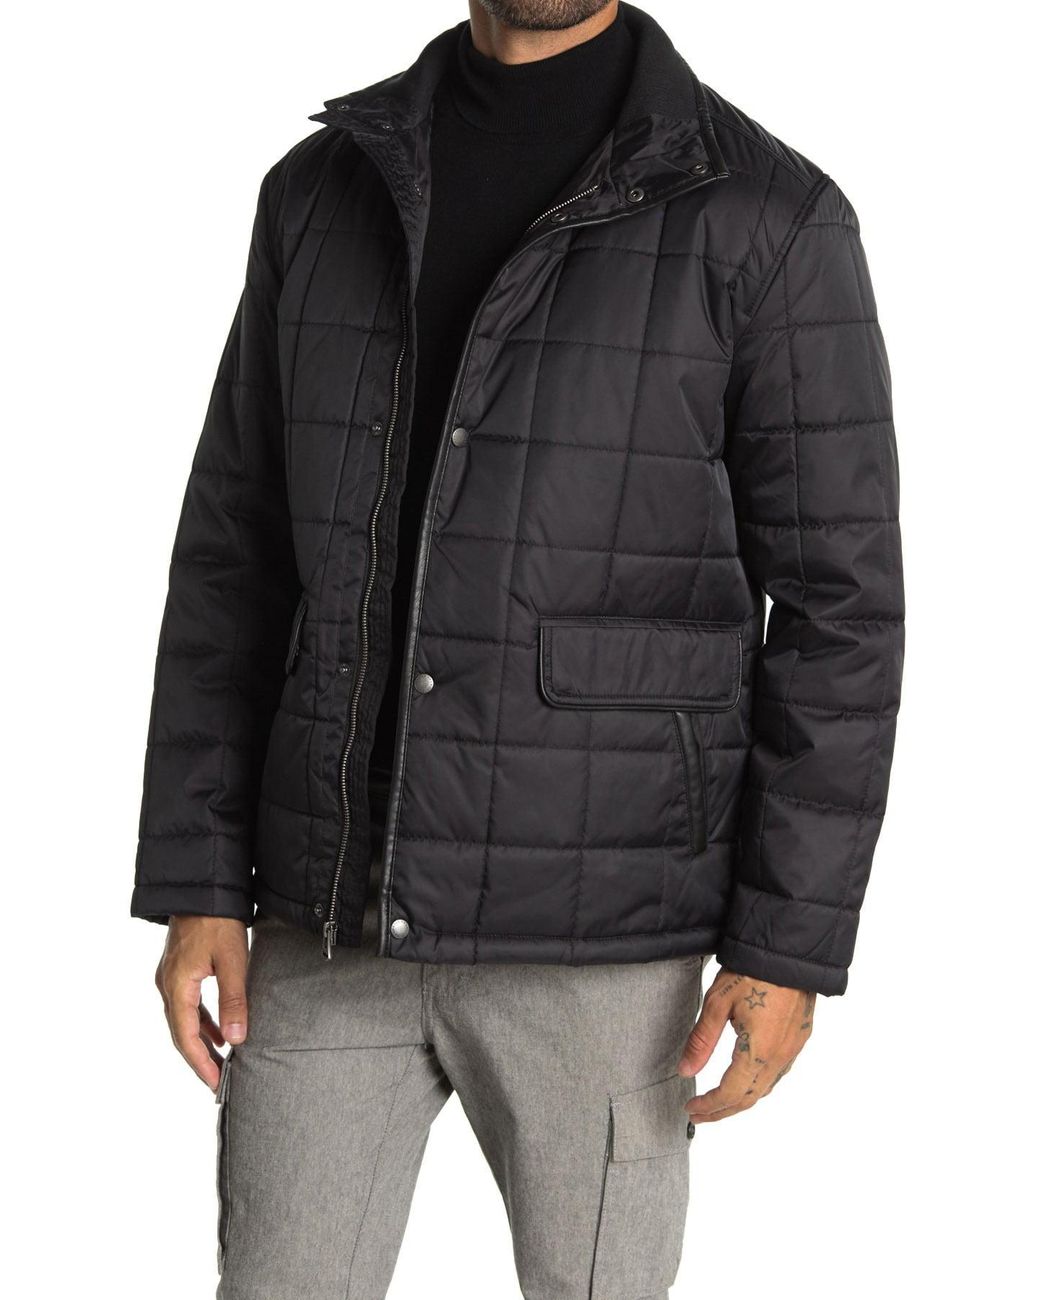 Cole Haan Synthetic Quilted Jacket in Black for Men - Lyst